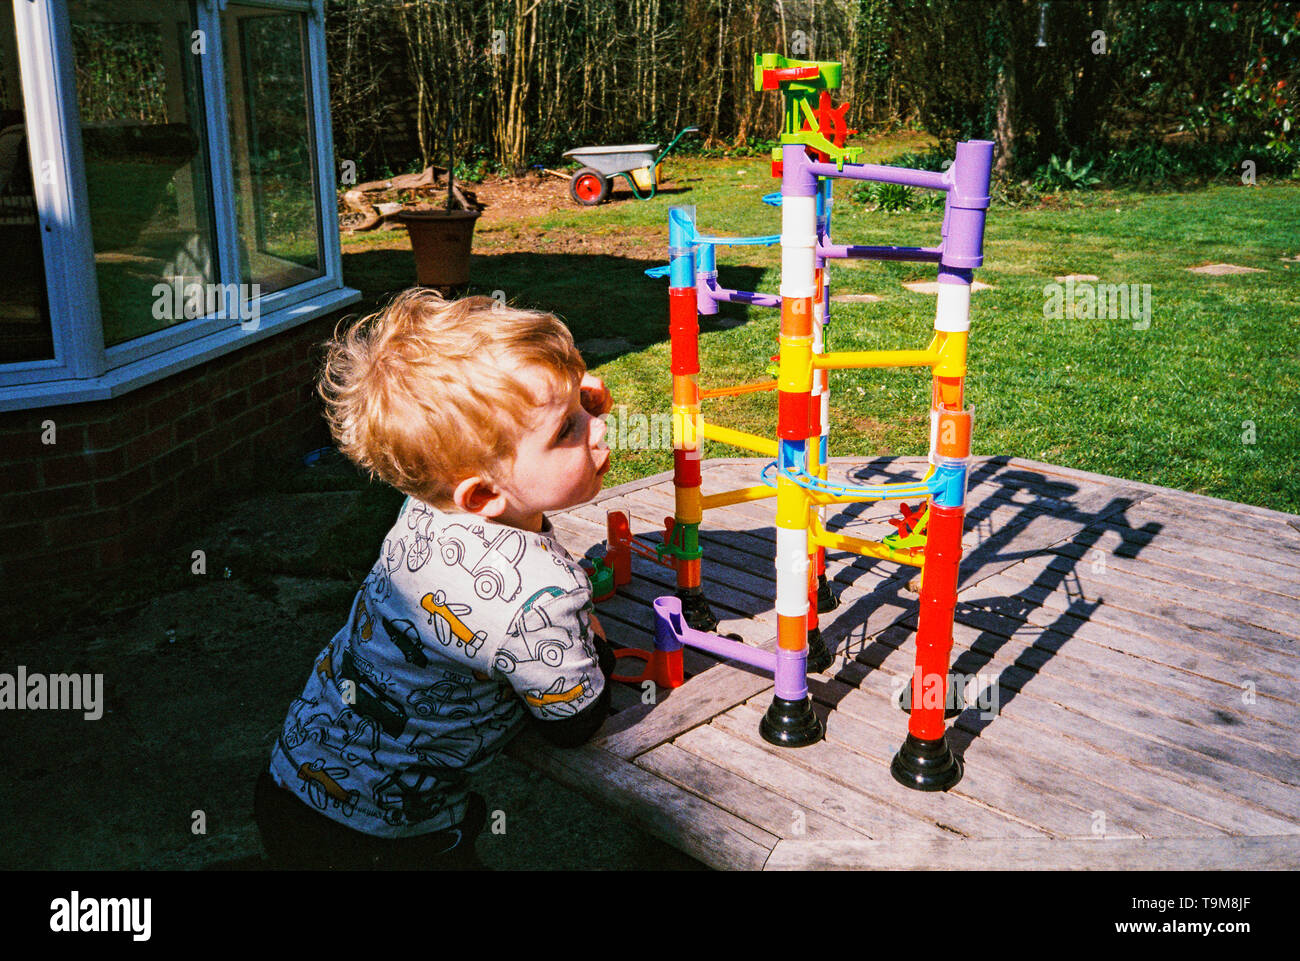 marble run for 2 year old